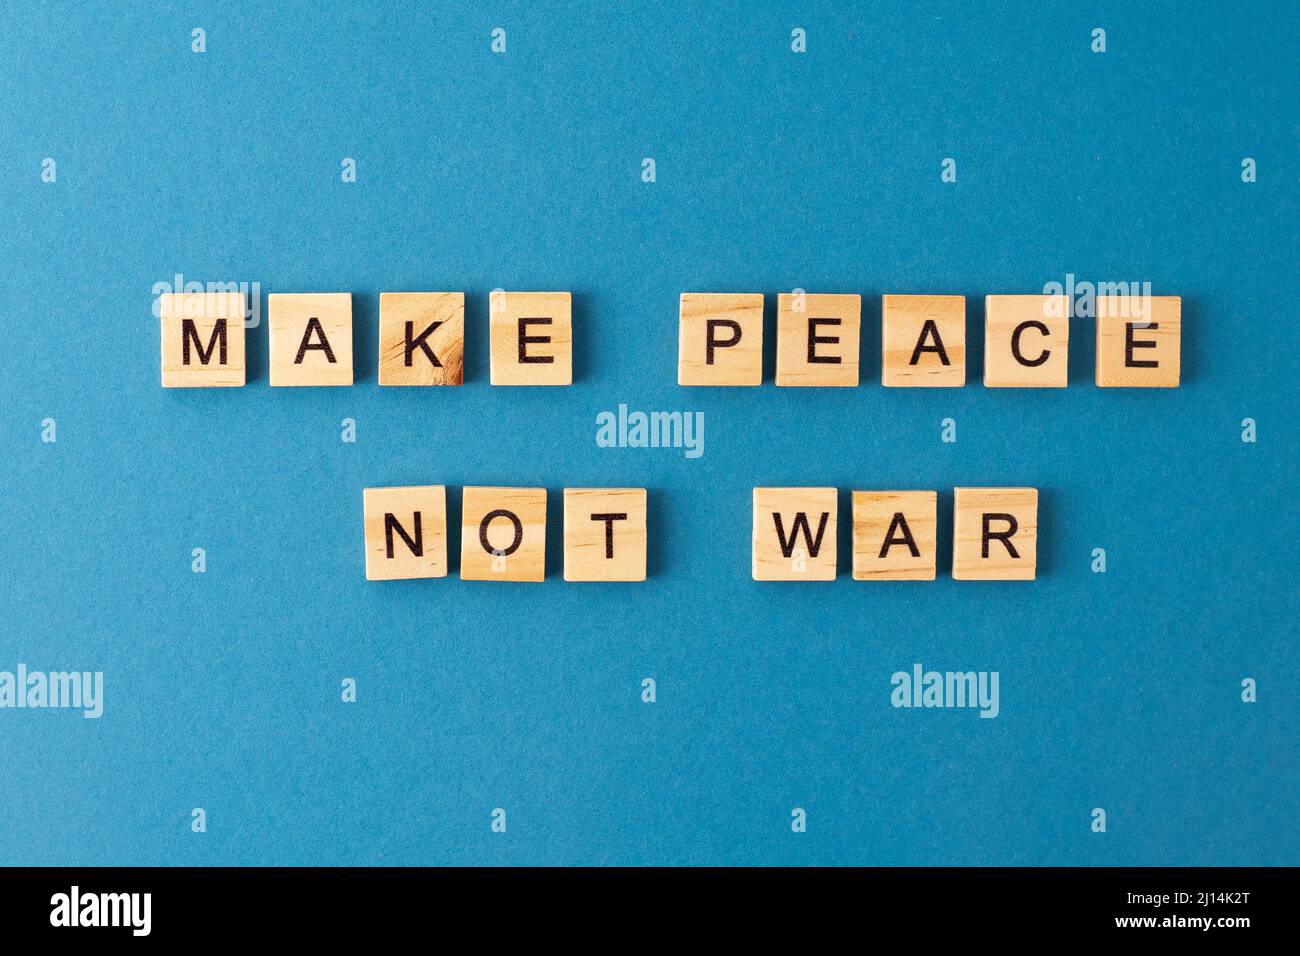 Make peace not war background. Phrase from wooden letters. Top view words. The phrases is laid out in wood letter. Motivation. Stock Photo